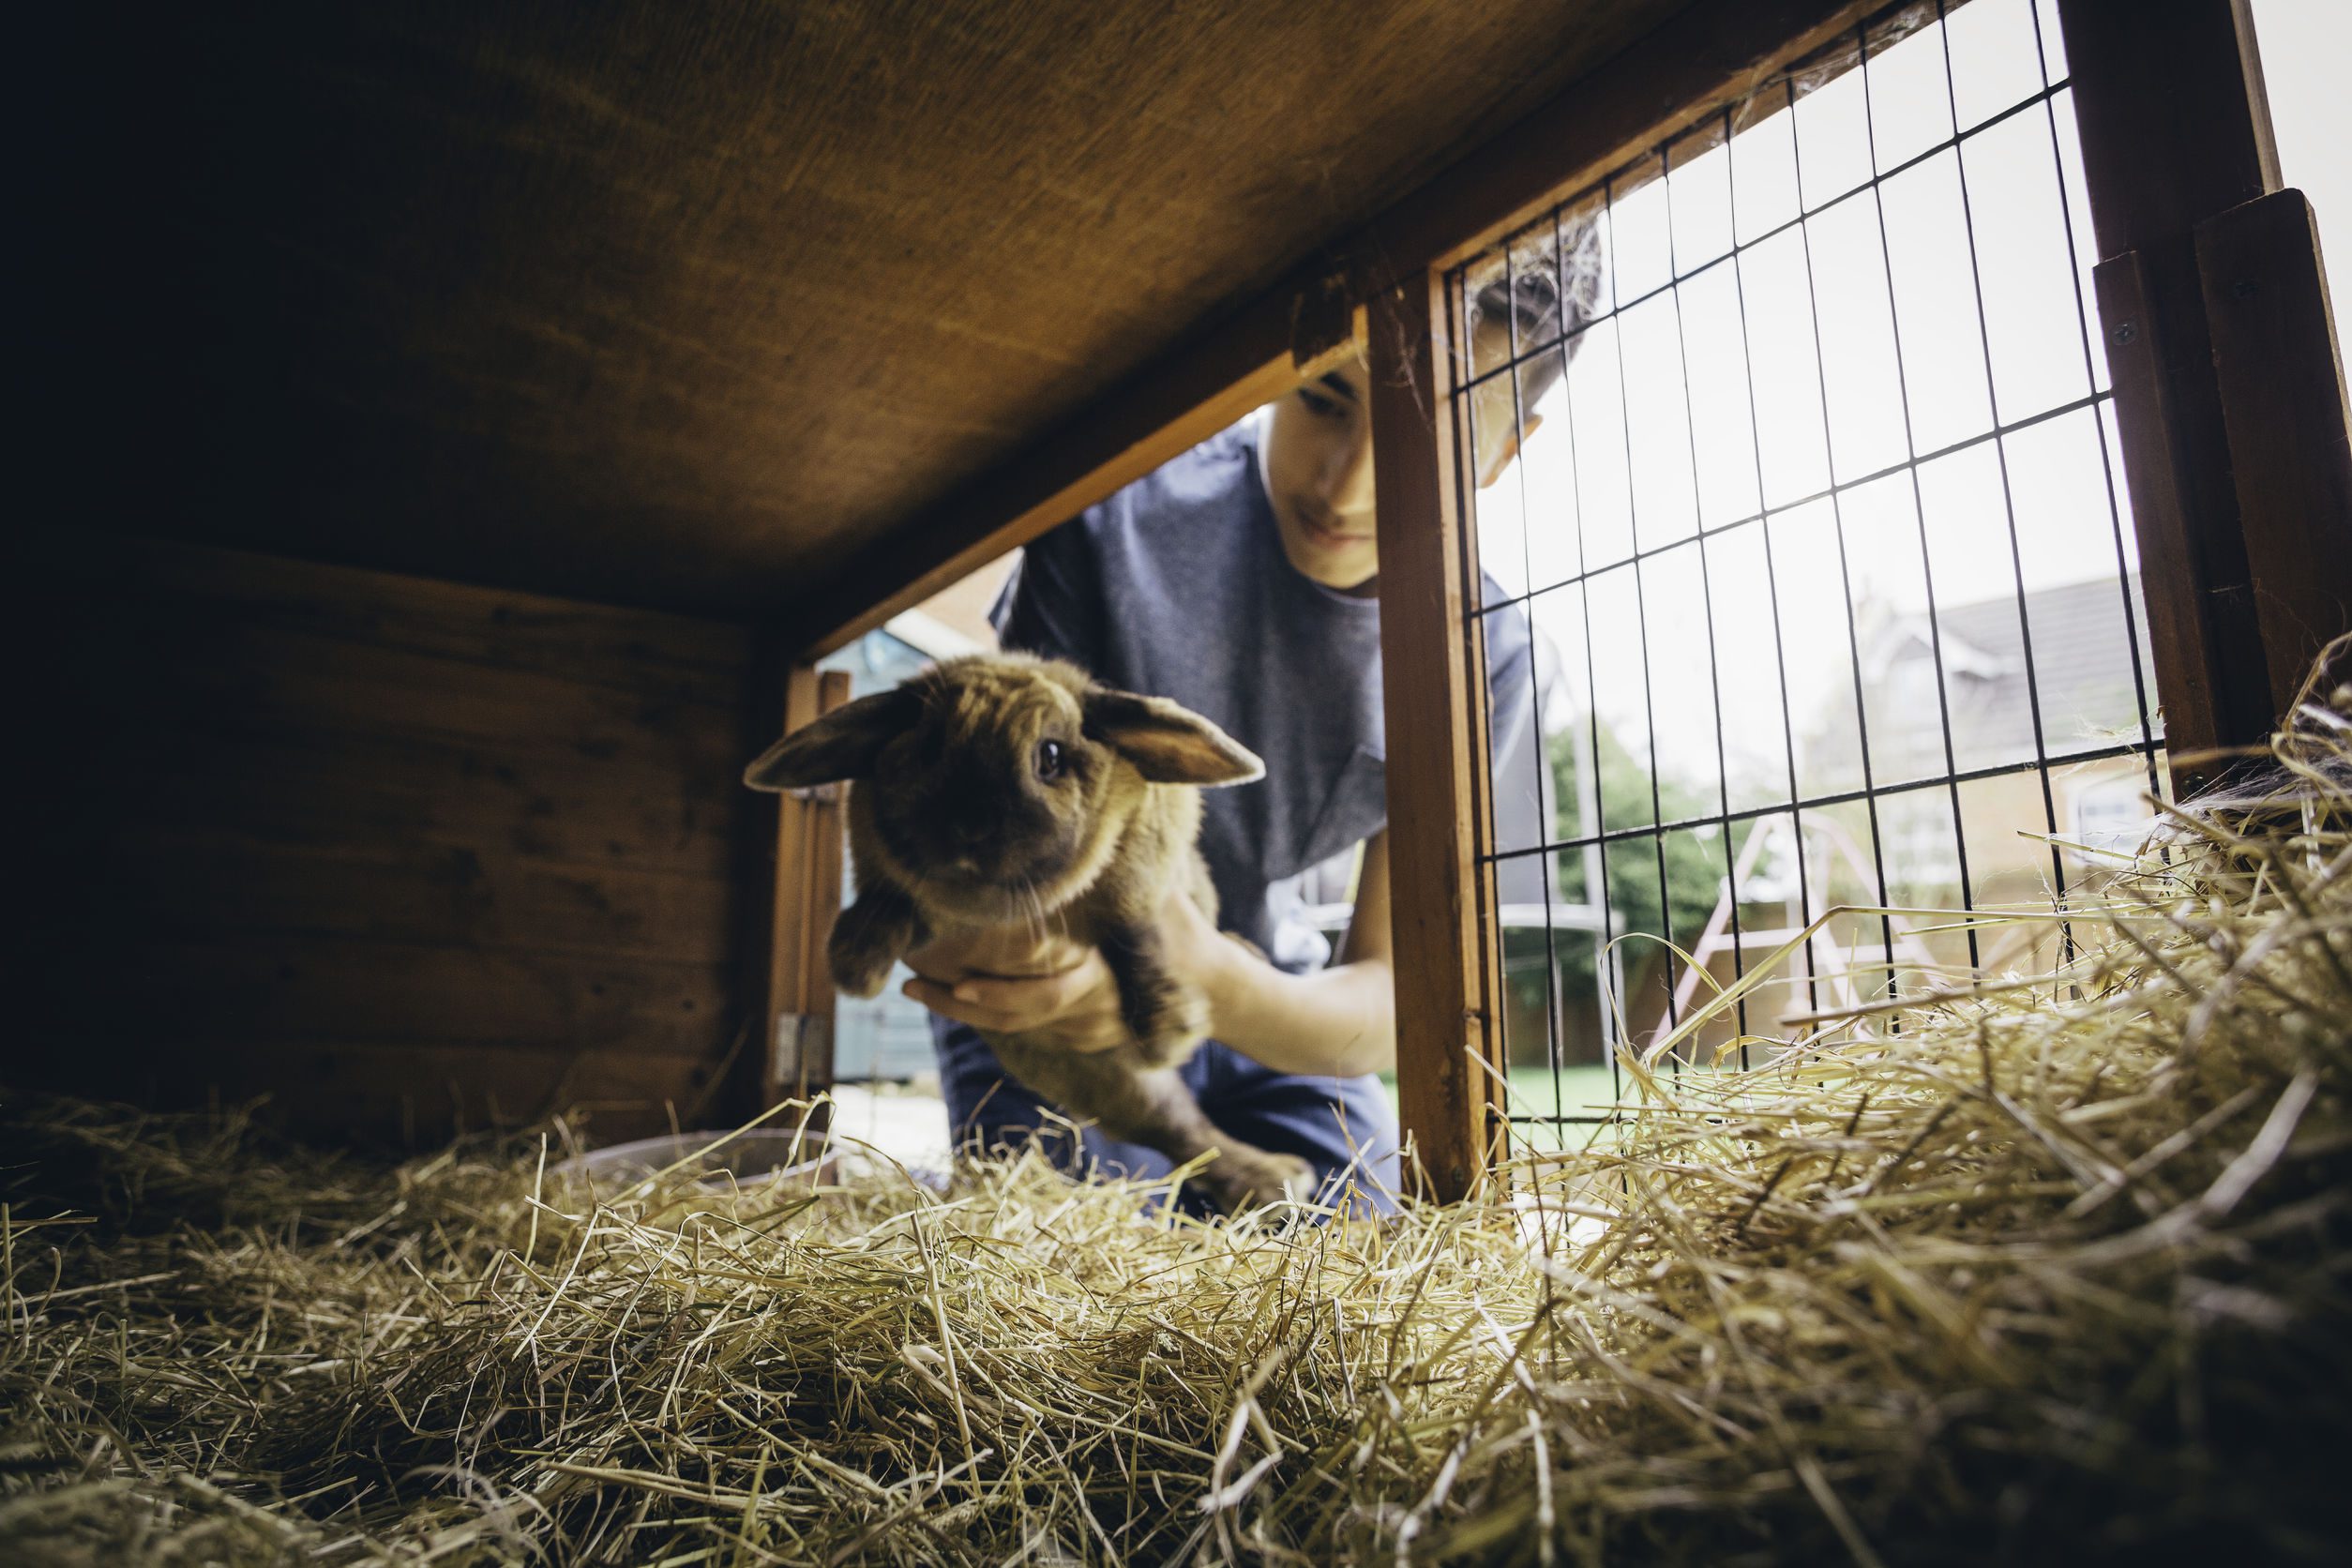 Pet rabbit being put back into its hutch by a teenage boy.